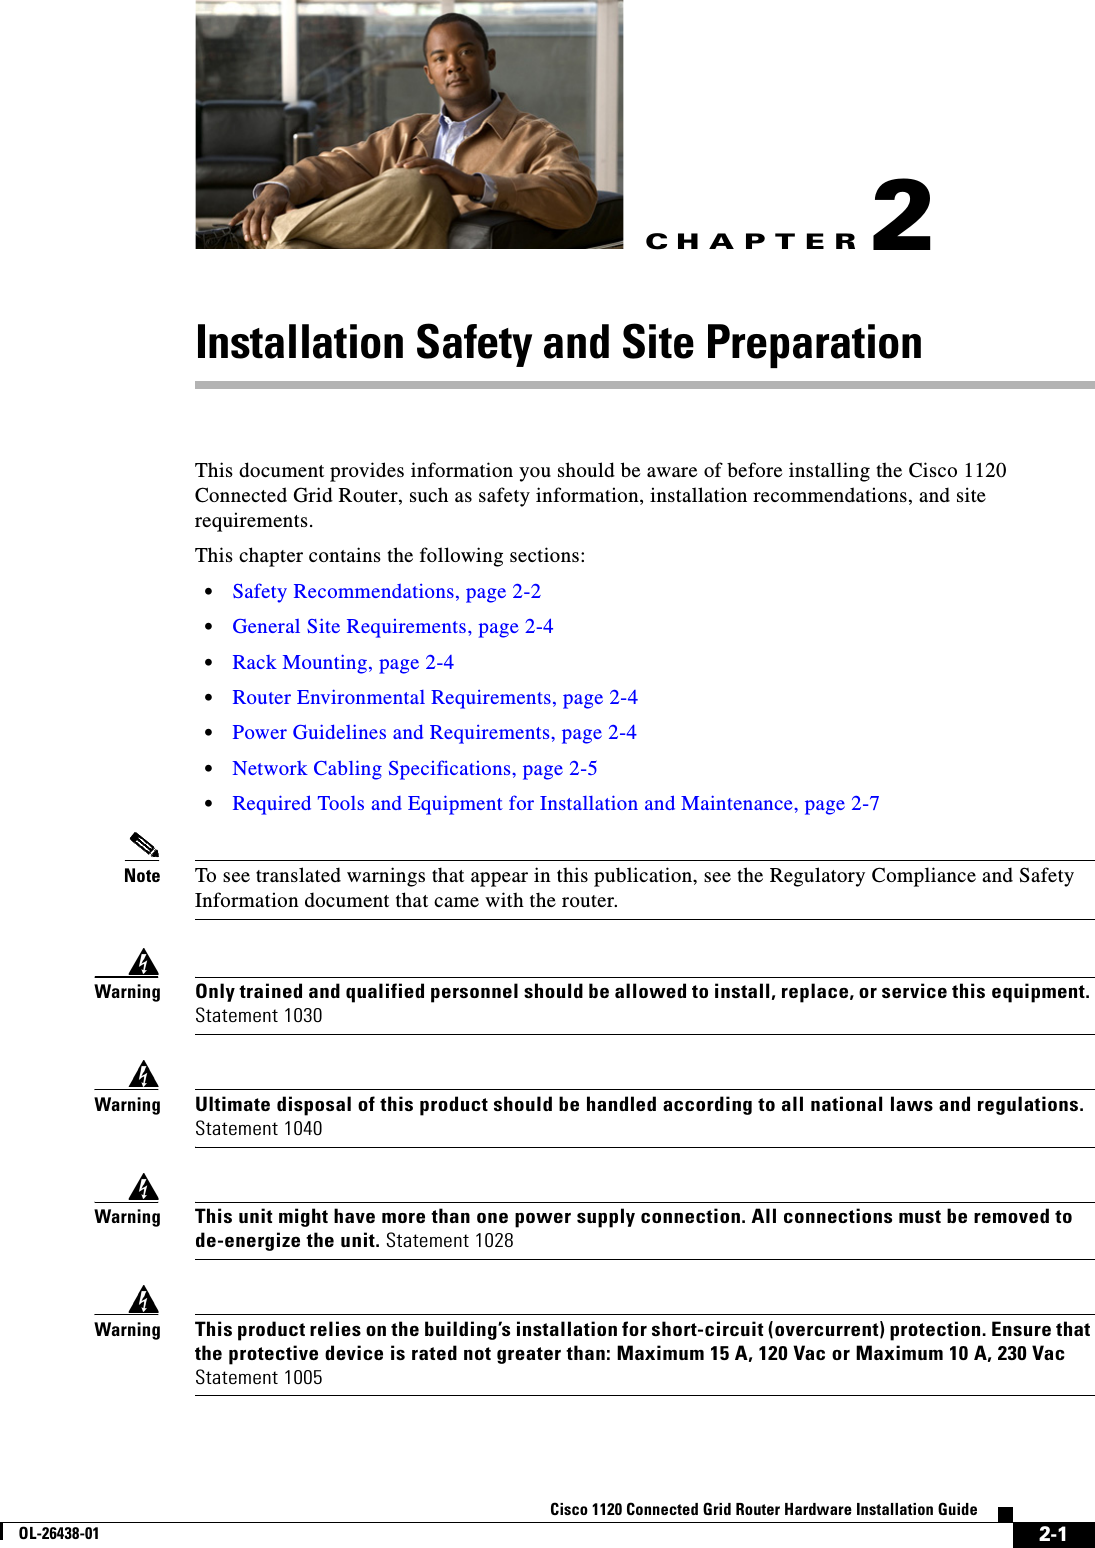 CHAPTER 2-1Cisco 1120 Connected Grid Router Hardware Installation GuideOL-26438-012Installation Safety and Site PreparationThis document provides information you should be aware of before installing the Cisco 1120 Connected Grid Router, such as safety information, installation recommendations, and site requirements. This chapter contains the following sections:•Safety Recommendations, page 2-2•General Site Requirements, page 2-4•Rack Mounting, page 2-4•Router Environmental Requirements, page 2-4•Power Guidelines and Requirements, page 2-4•Network Cabling Specifications, page 2-5•Required Tools and Equipment for Installation and Maintenance, page 2-7Note To see translated warnings that appear in this publication, see the Regulatory Compliance and Safety Information document that came with the router.WarningOnly trained and qualified personnel should be allowed to install, replace, or service this equipment. Statement 1030WarningUltimate disposal of this product should be handled according to all national laws and regulations. Statement 1040WarningThis unit might have more than one power supply connection. All connections must be removed to de-energize the unit. Statement 1028WarningThis product relies on the building’s installation for short-circuit (overcurrent) protection. Ensure that the protective device is rated not greater than: Maximum 15 A, 120 Vac or Maximum 10 A, 230 Vac Statement 1005